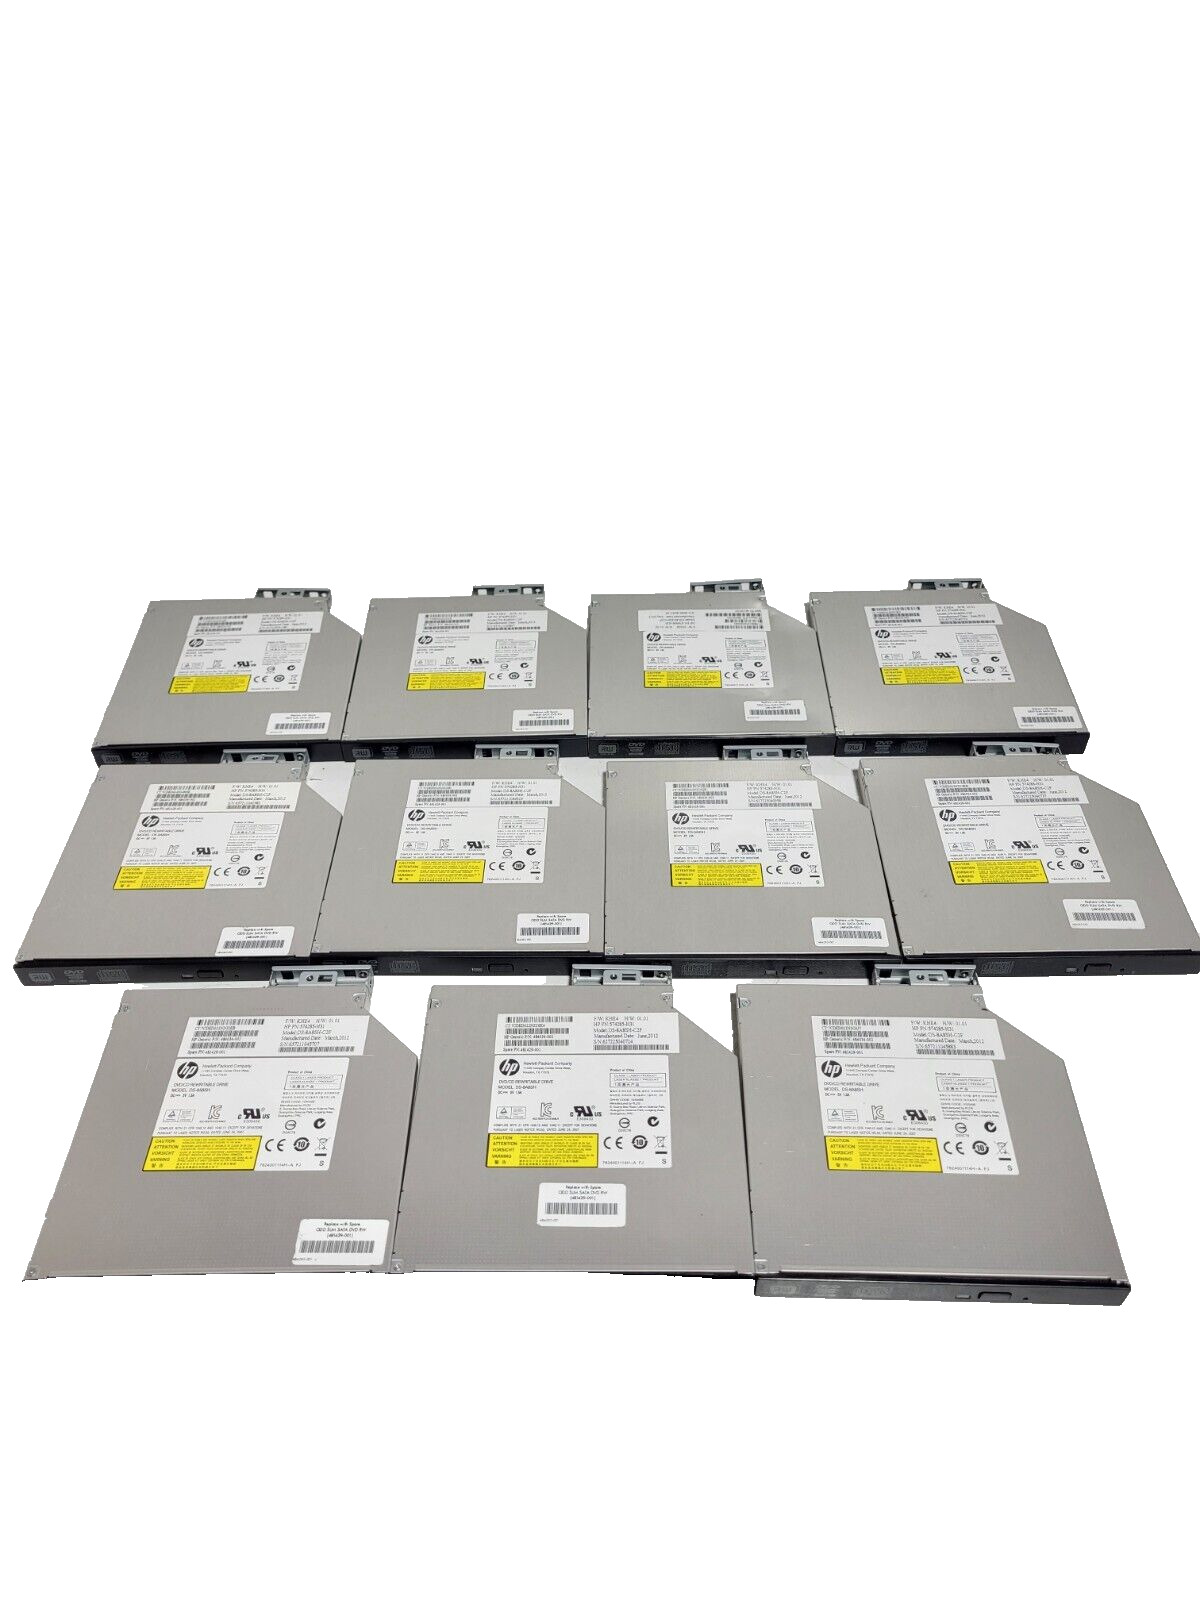 DVD/CD RW Rewritable Drive DS-8A8SH DS-8A8SH113C lot of 11